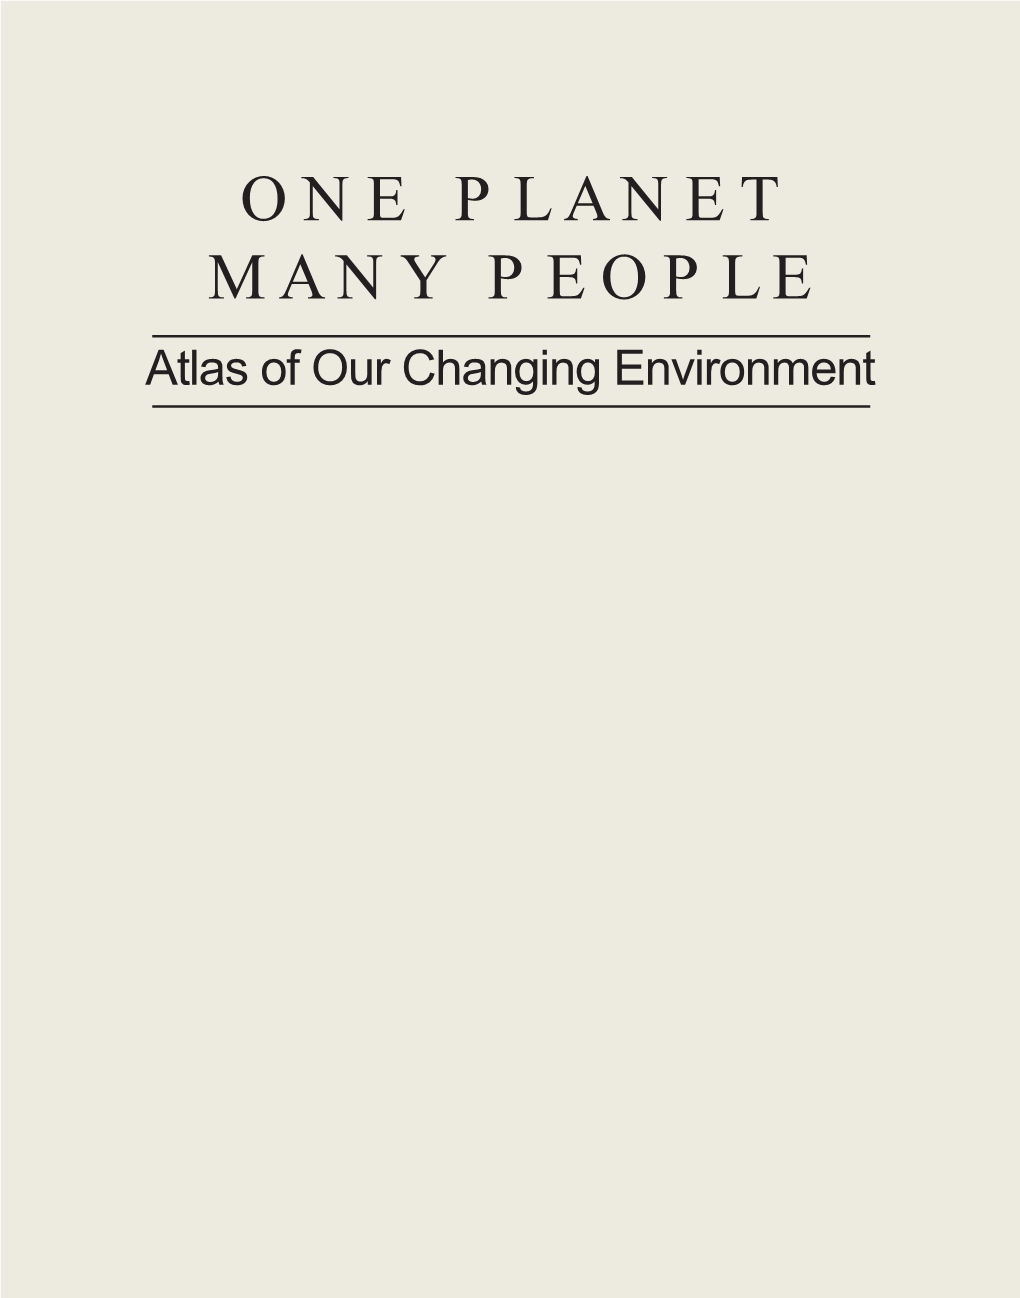 ONE PLANET MANY PEOPLE Atlas of Our Changing Environment